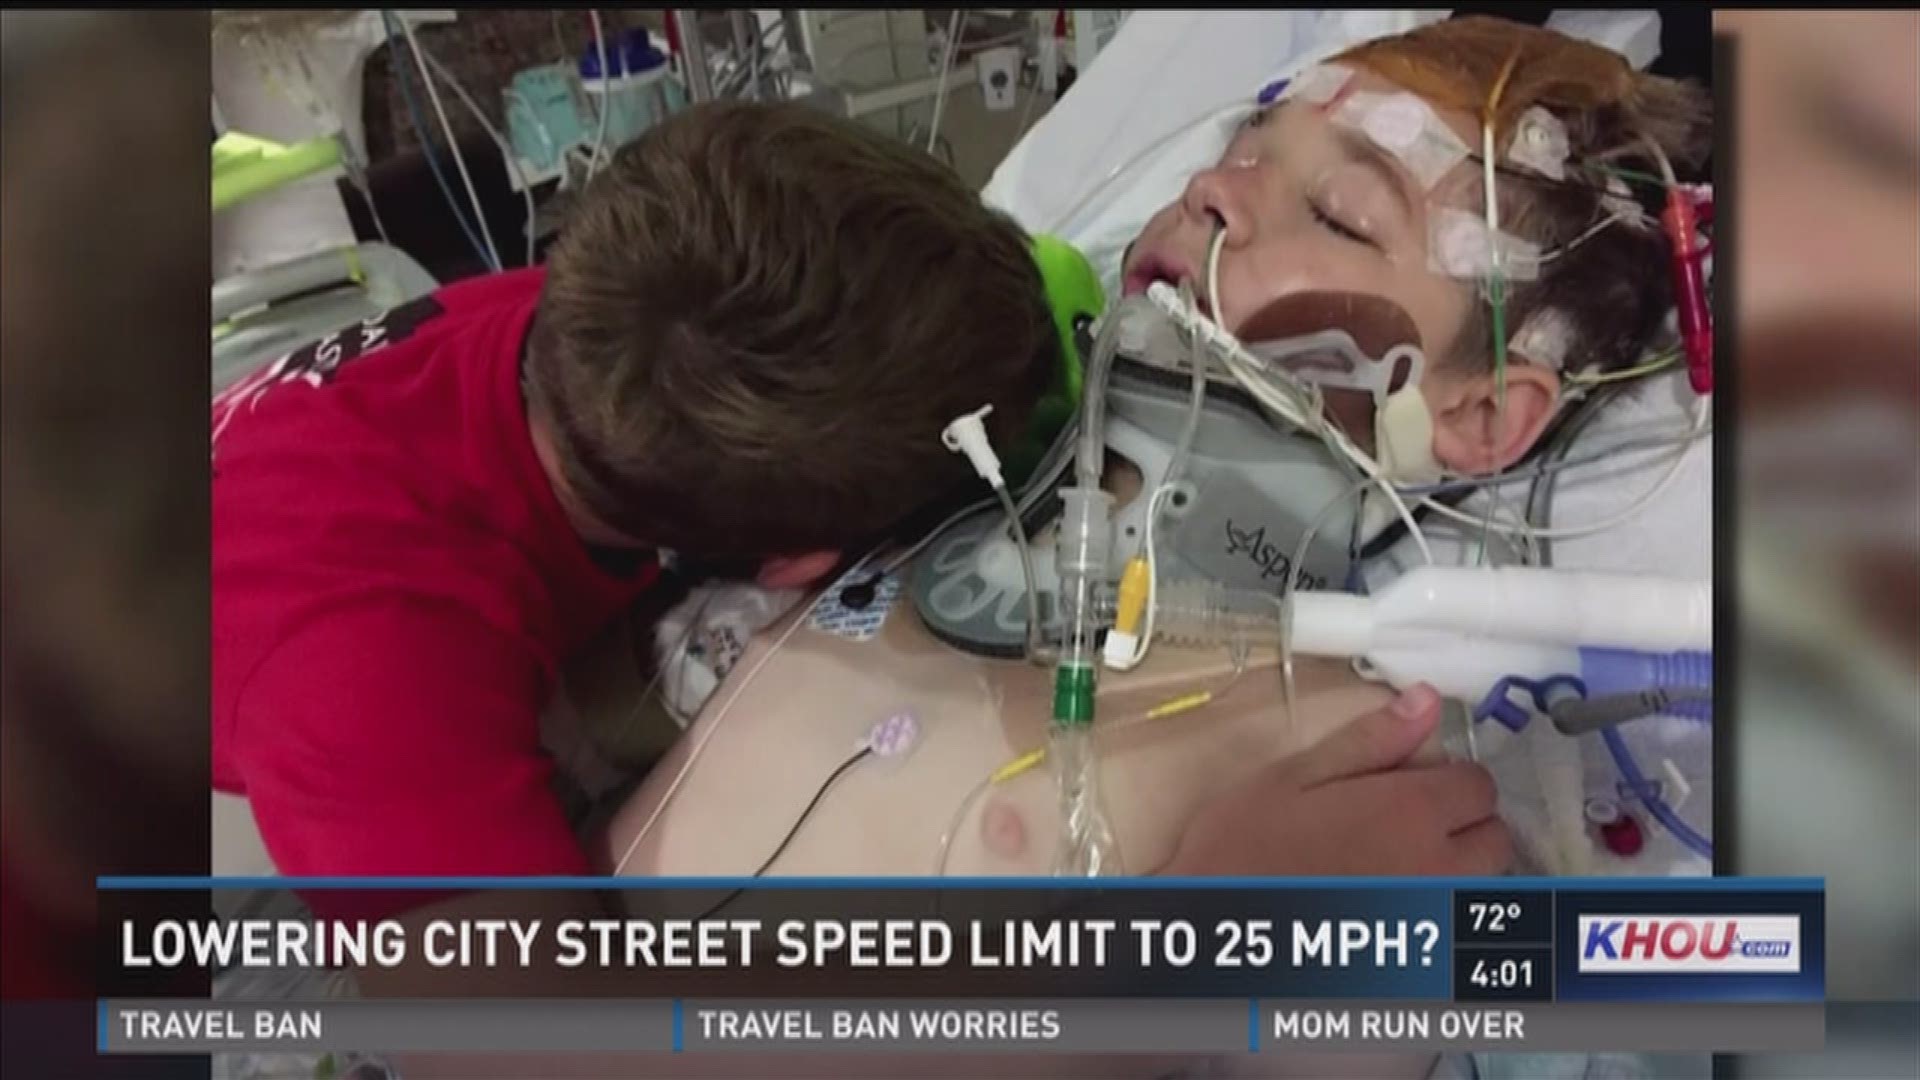 There's a new push to lower speed limits on city streets across the state. In Texas, the posted speed limit on most urban streets is 30 miles per hour. That's also the default speed limit when there's no sign posted. But lawmakers in Austin are considerin